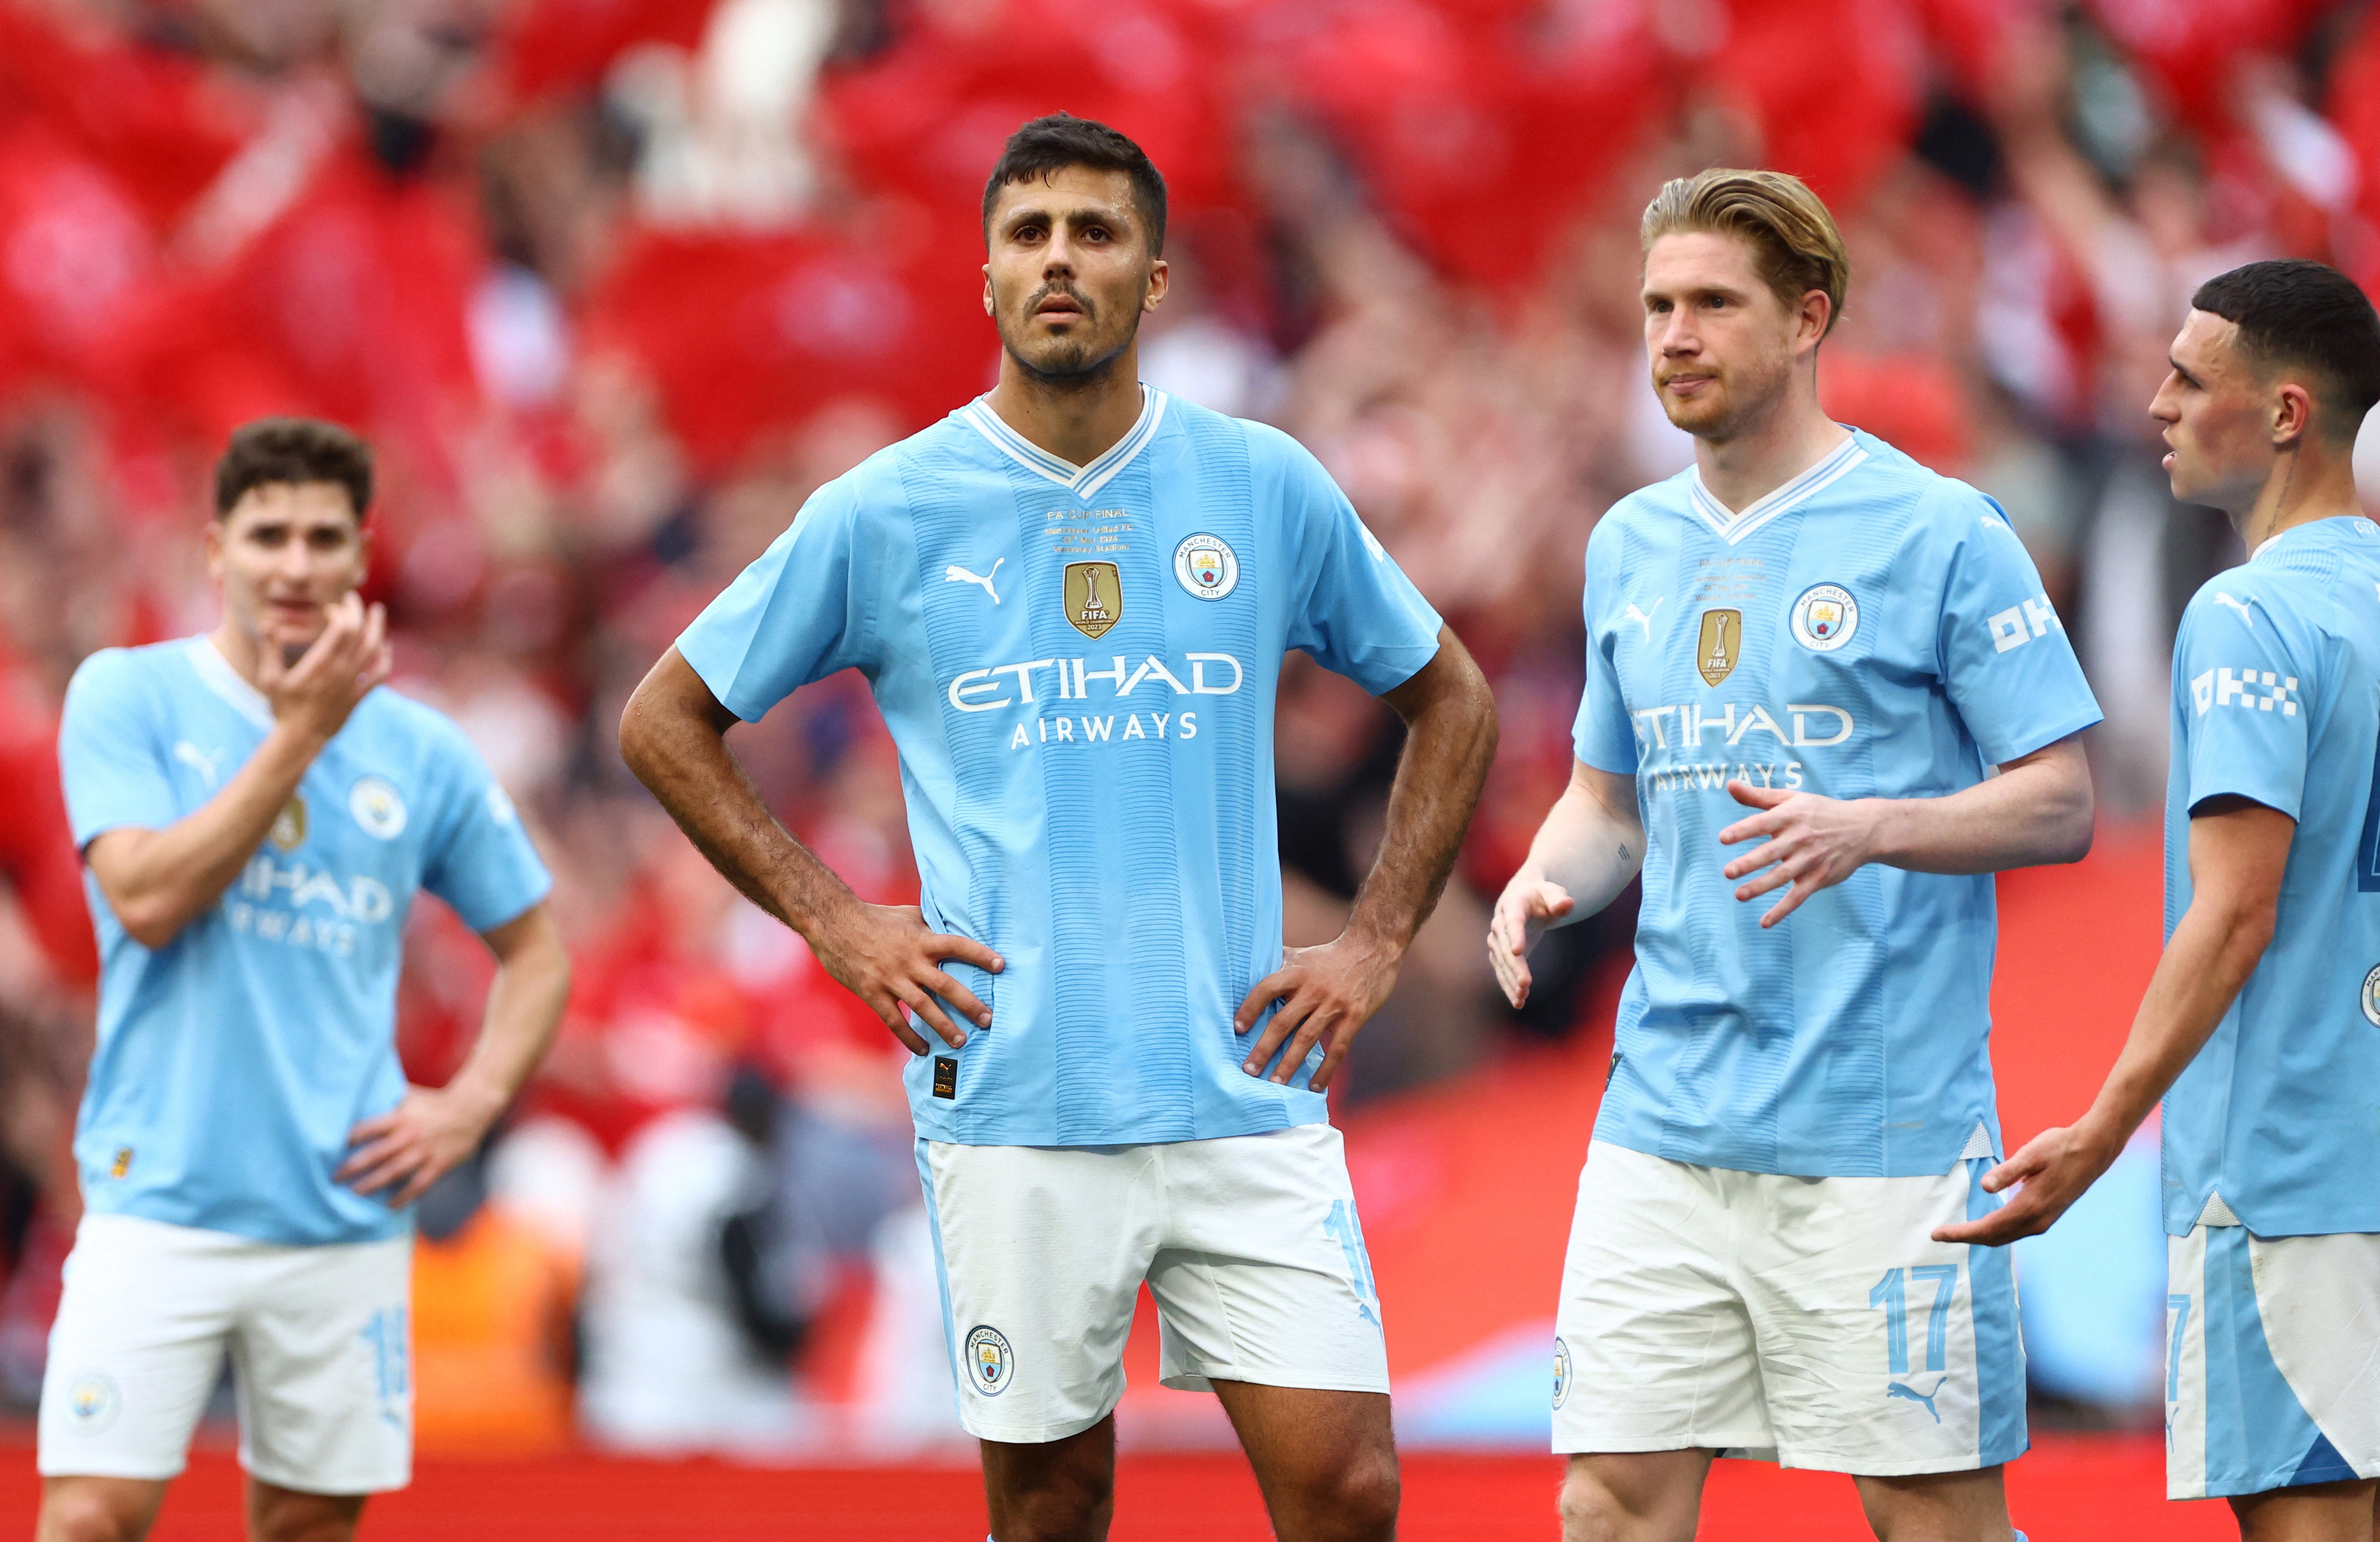 Man City may be approaching a fork in the road after this FA Cup final loss